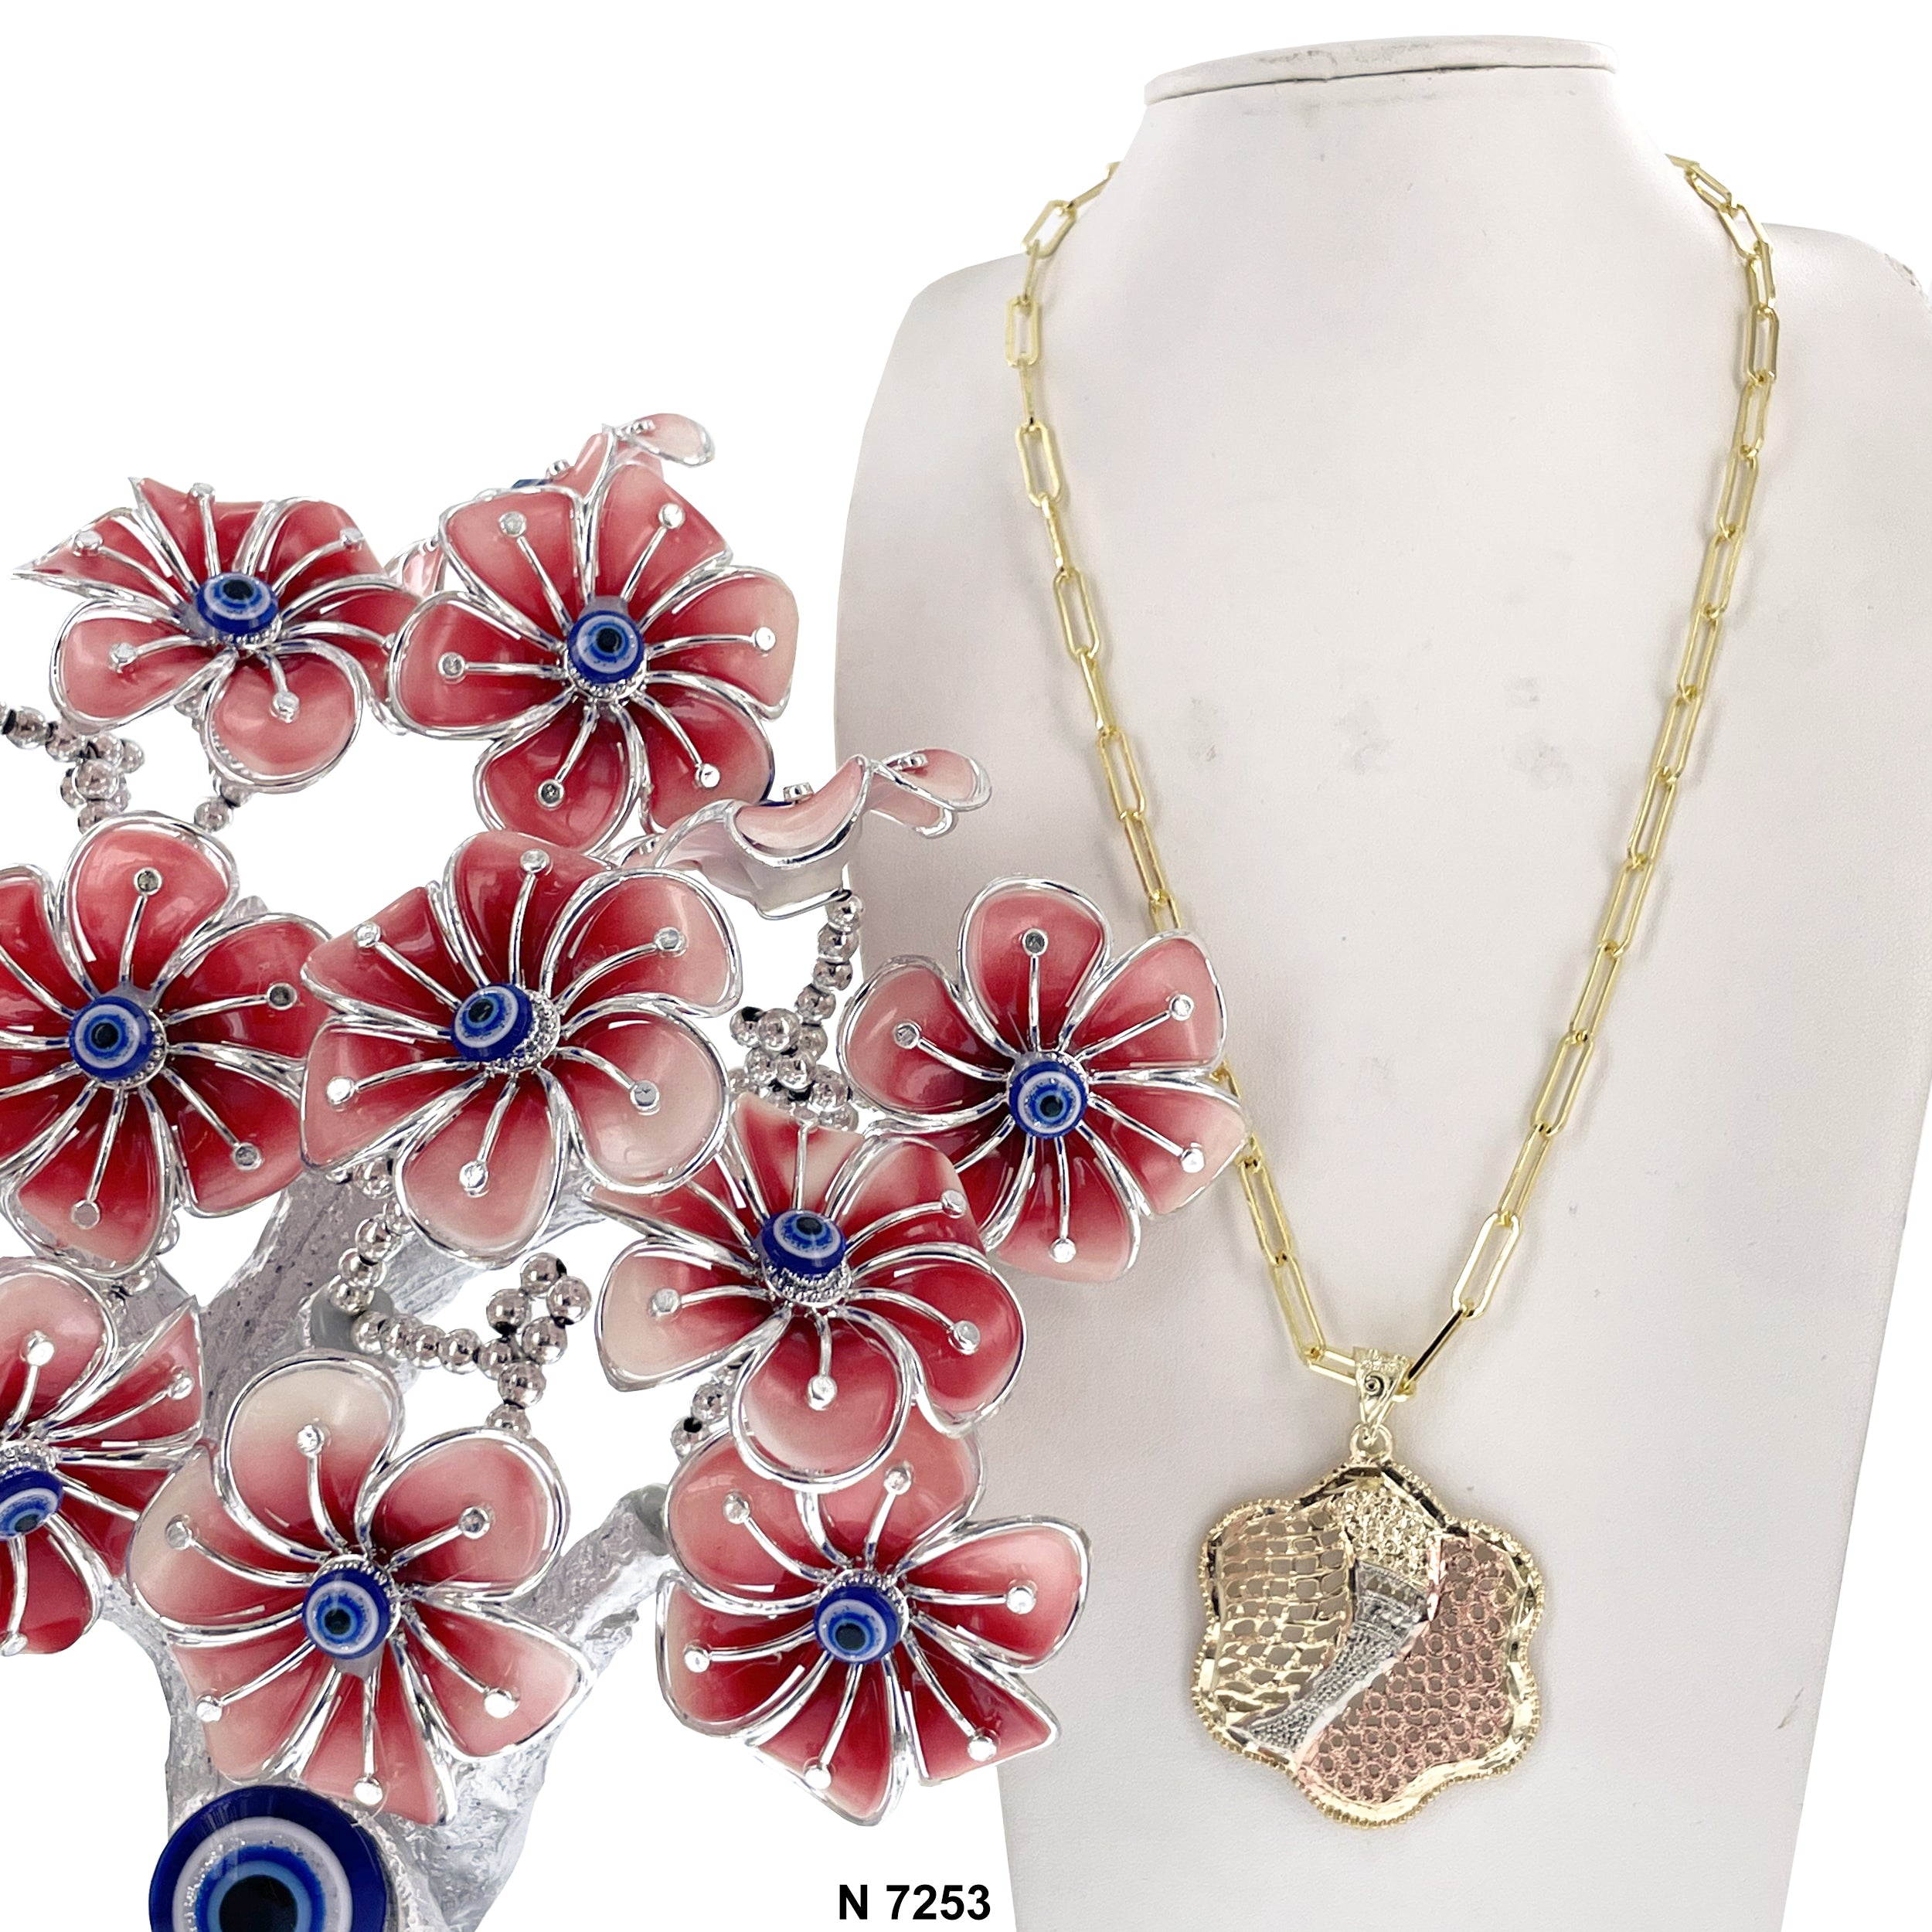 Hexie Flower Filigree Paper Clip Chain Necklace N 7253 3T